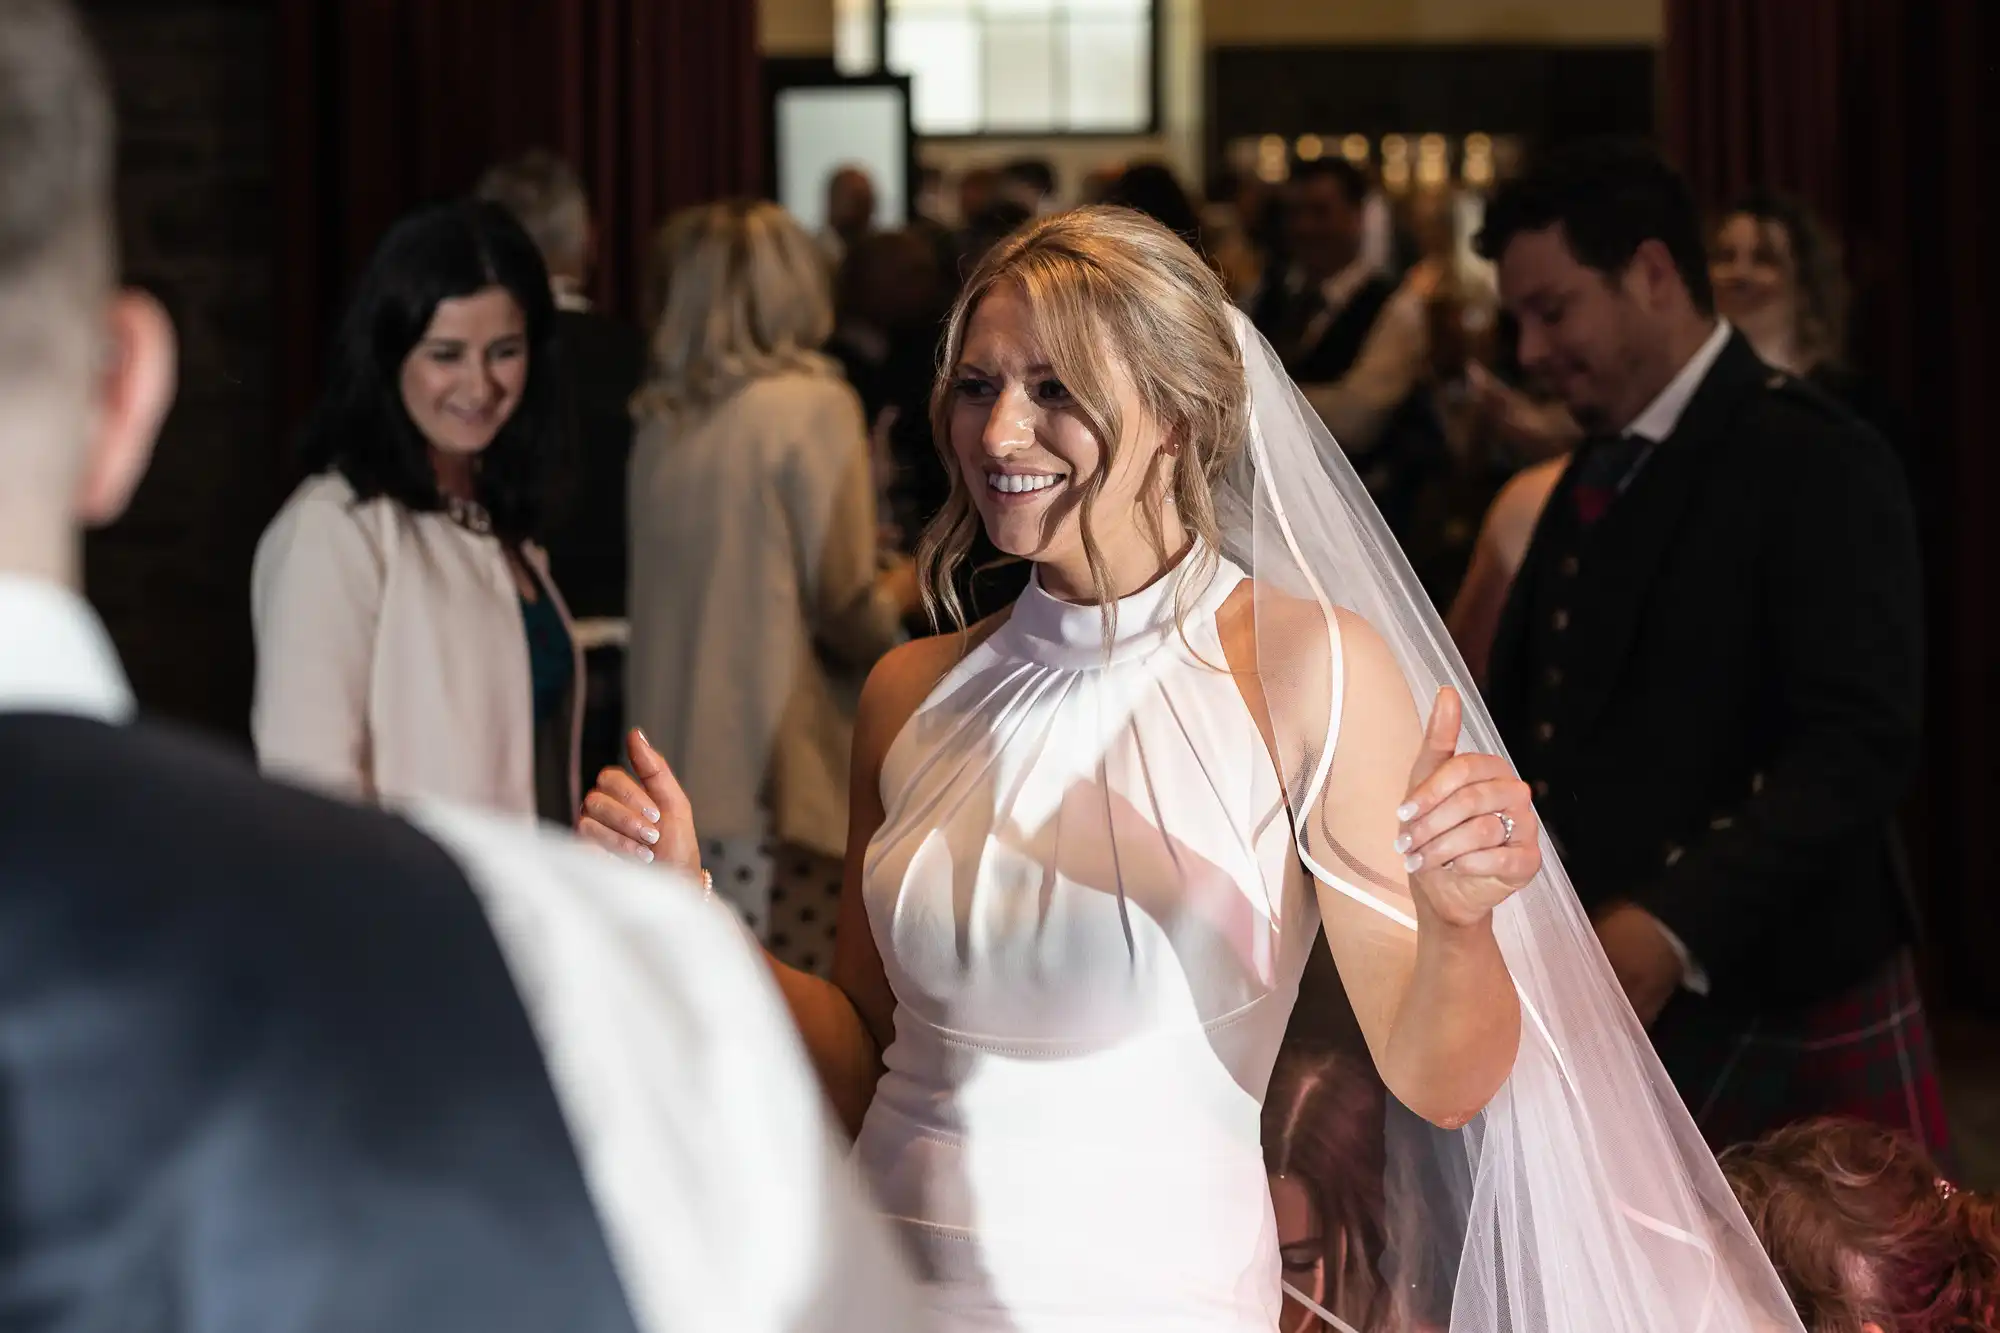 A bride in a white dress smiles joyfully at a guest during an indoor wedding reception, with blurred attendees in the background.